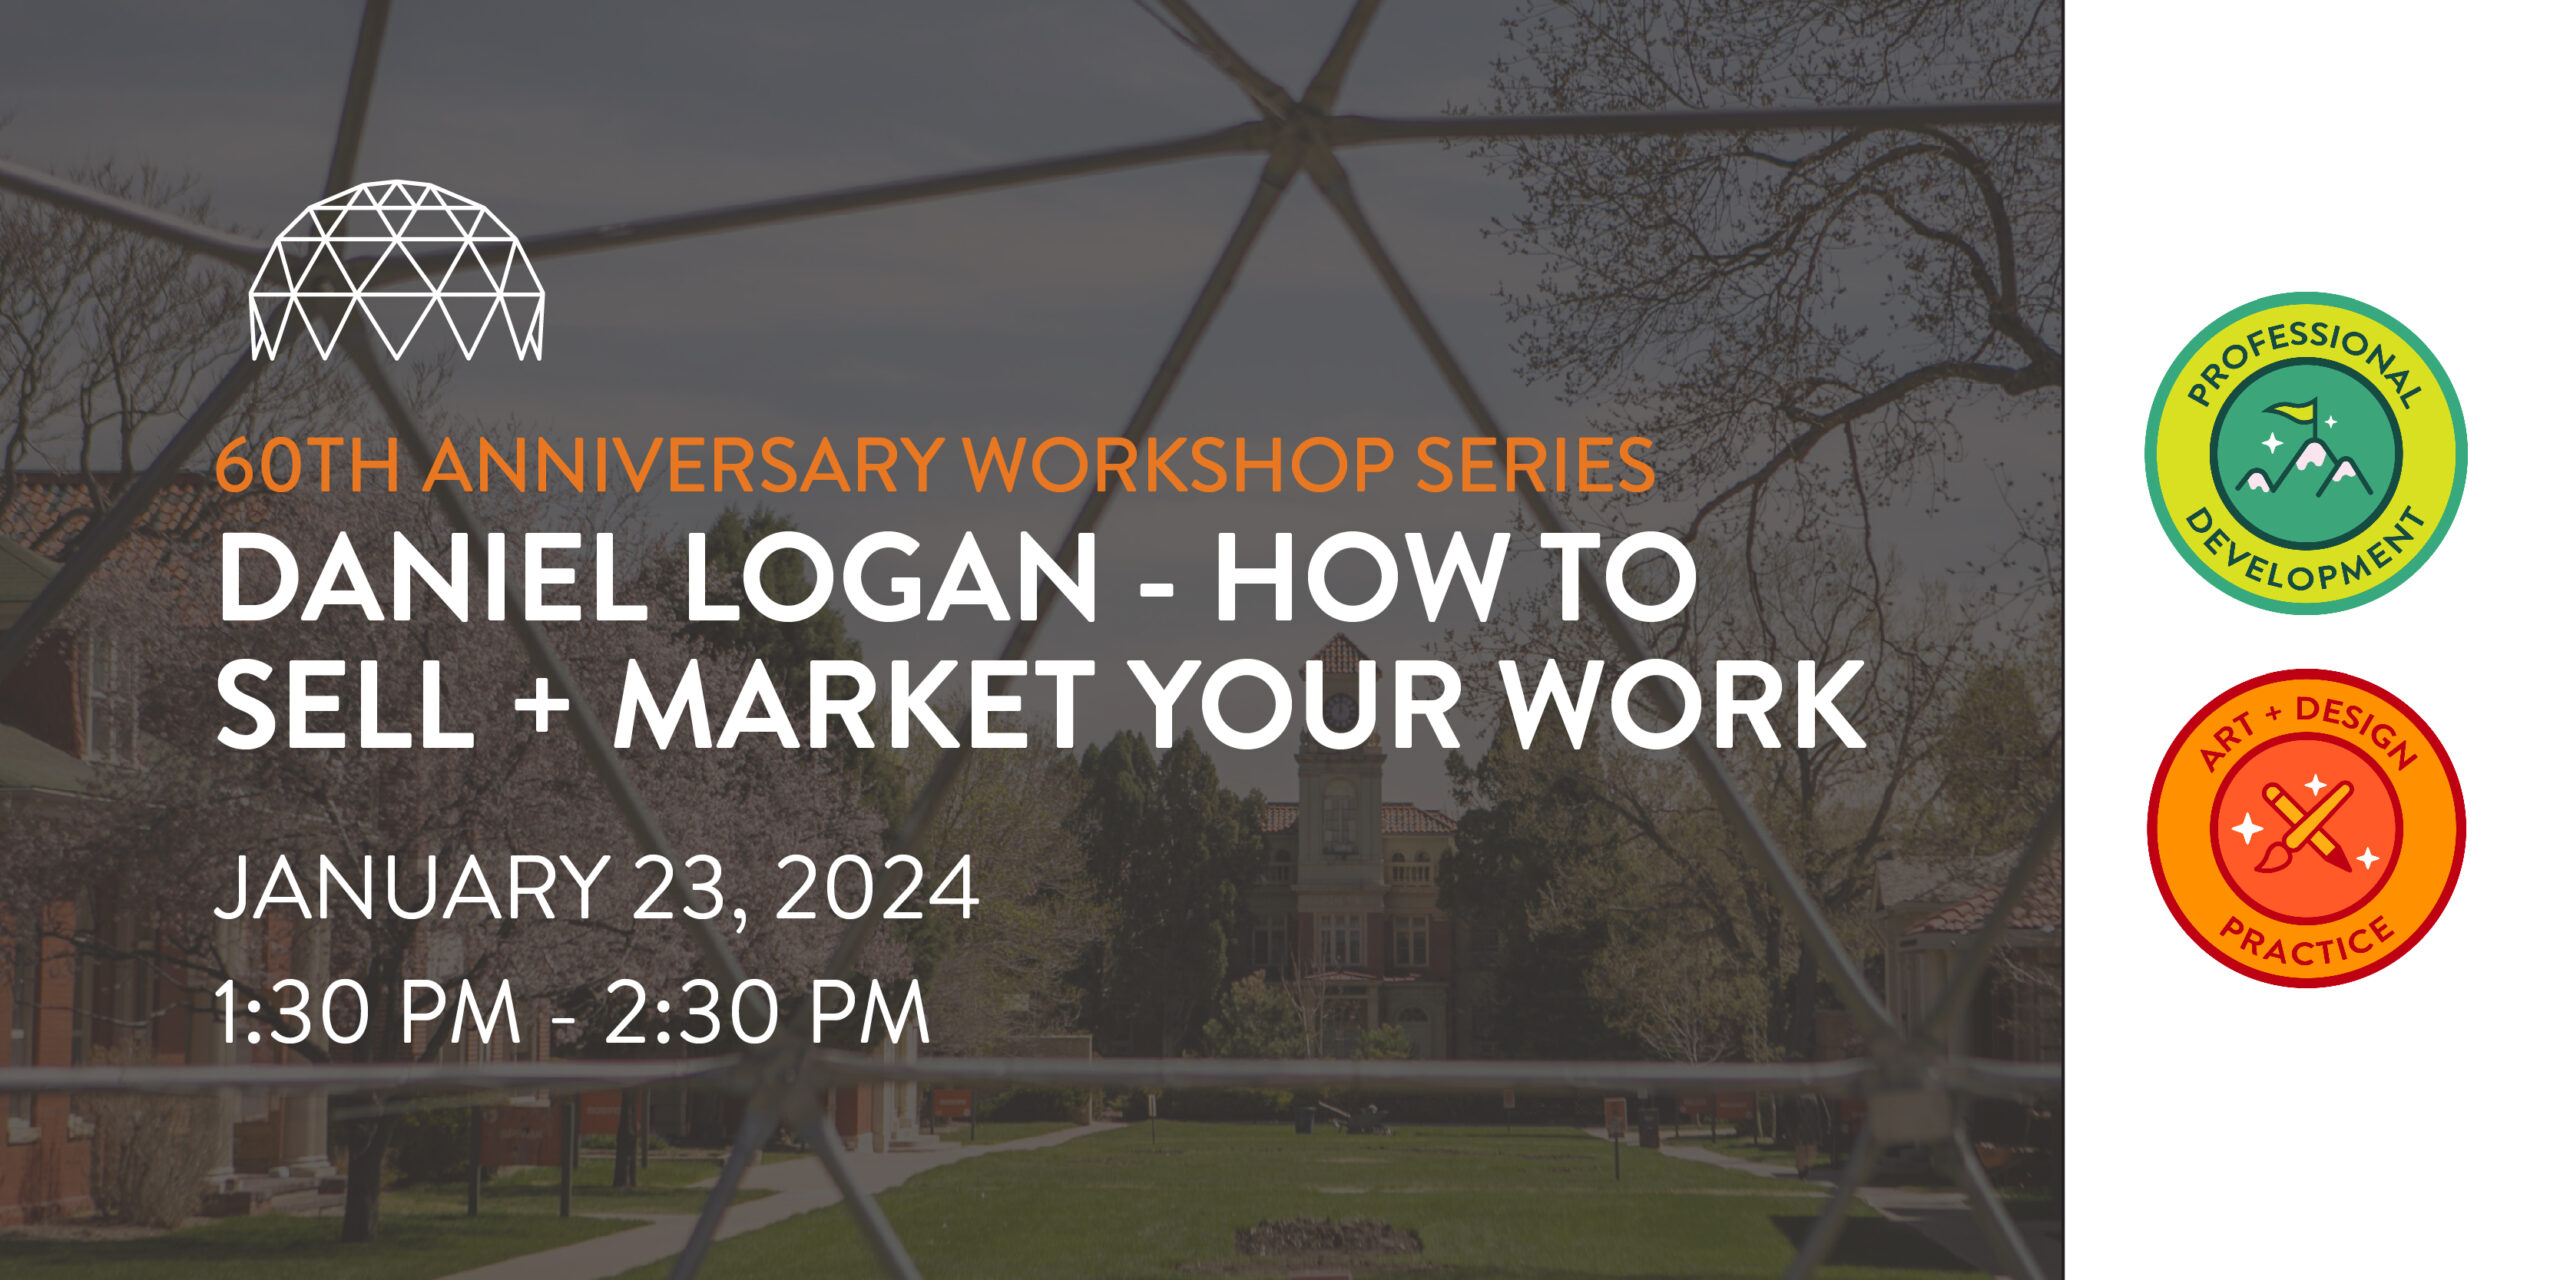 RMCAD’s 60th Anniversary Workshop Series: Daniel Logan- How to Sell and Market your Work